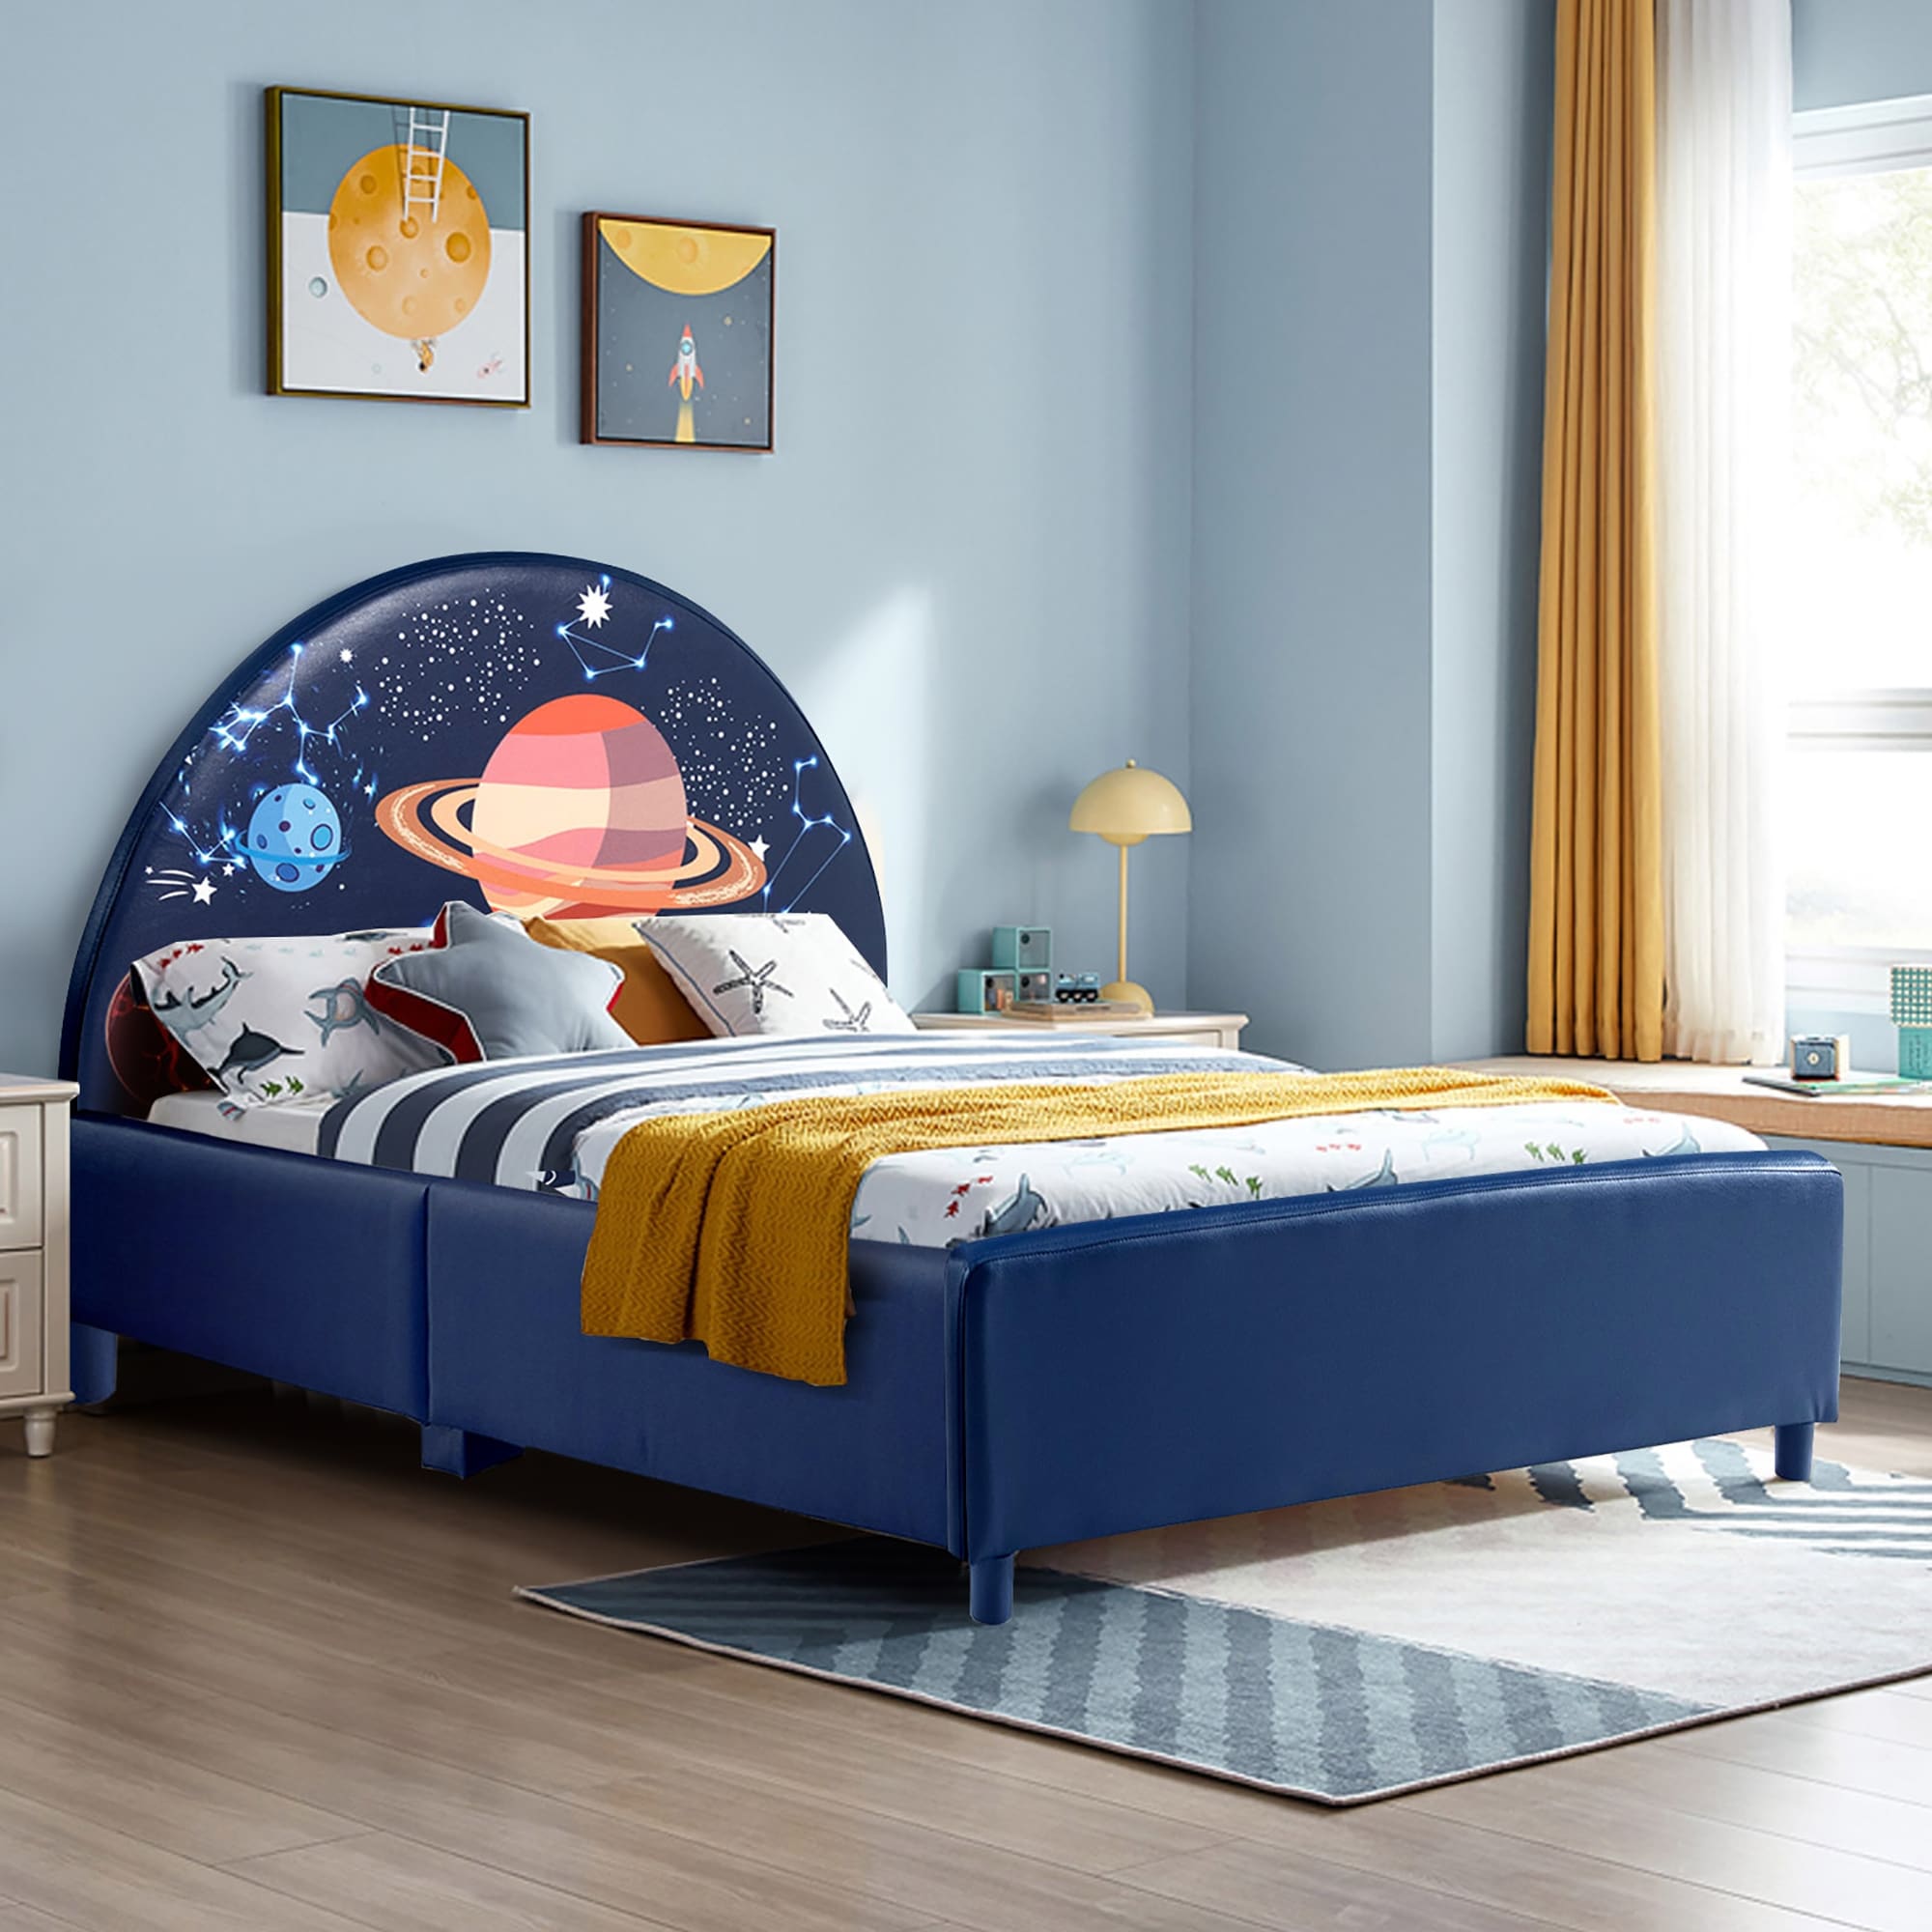 https://ak1.ostkcdn.com/images/products/is/images/direct/7e61722bbe11cb6240eaf620981b1c551134e3df/Costway-Kids-Upholstered-Platform-Bed-Children-Twin-Size-Wooden-Bed.jpg